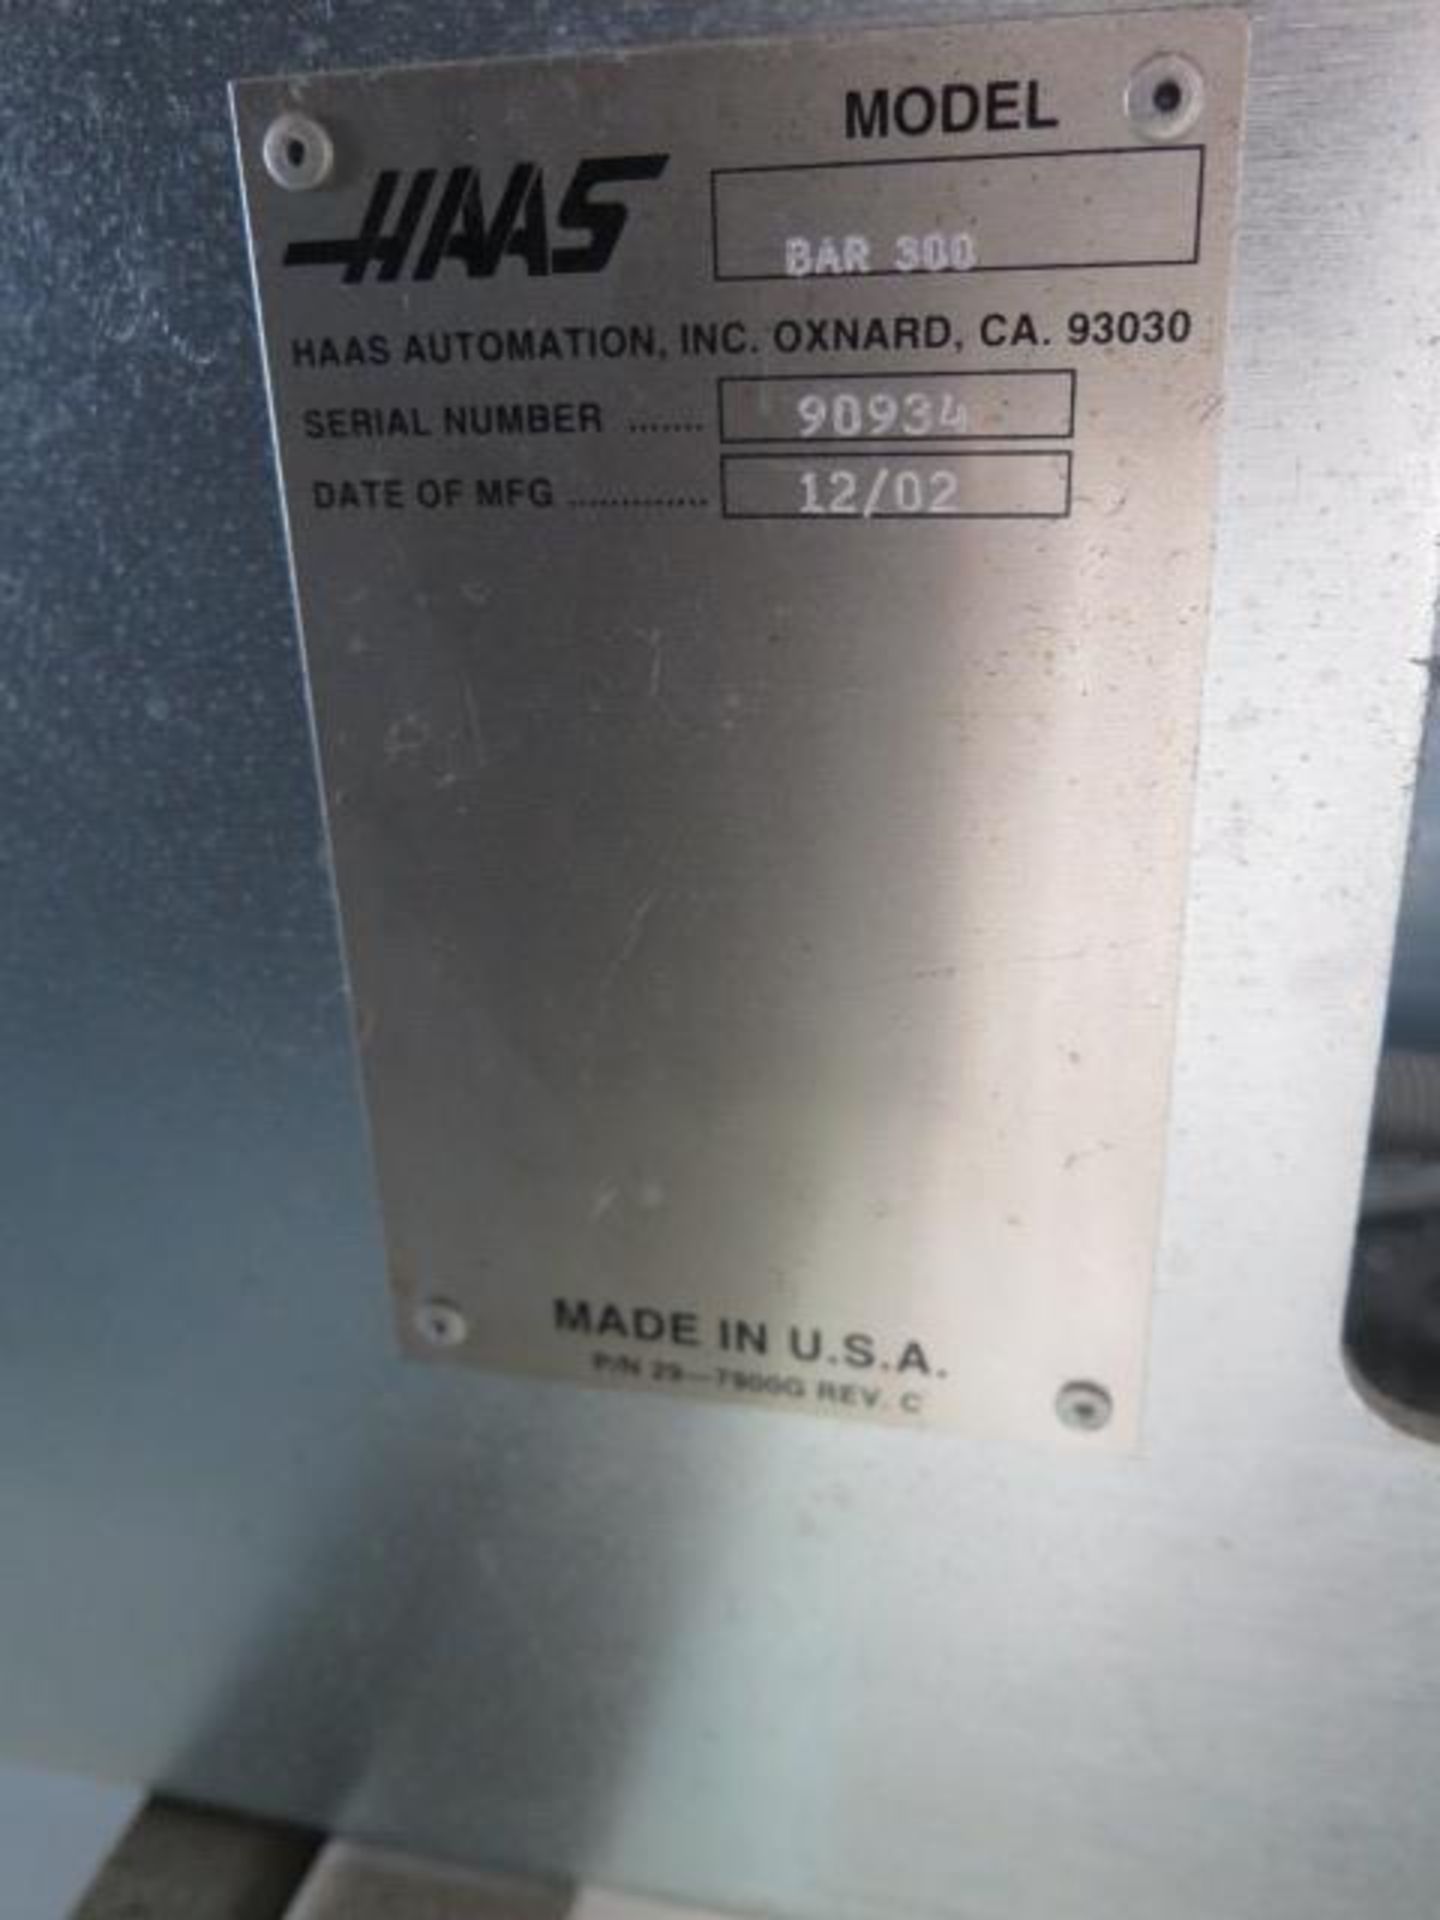 Haas ServoBar 300 Automatic Bar Loader / Feeder (SOLD AS-IS - NO WARRANTY) - Image 7 of 7